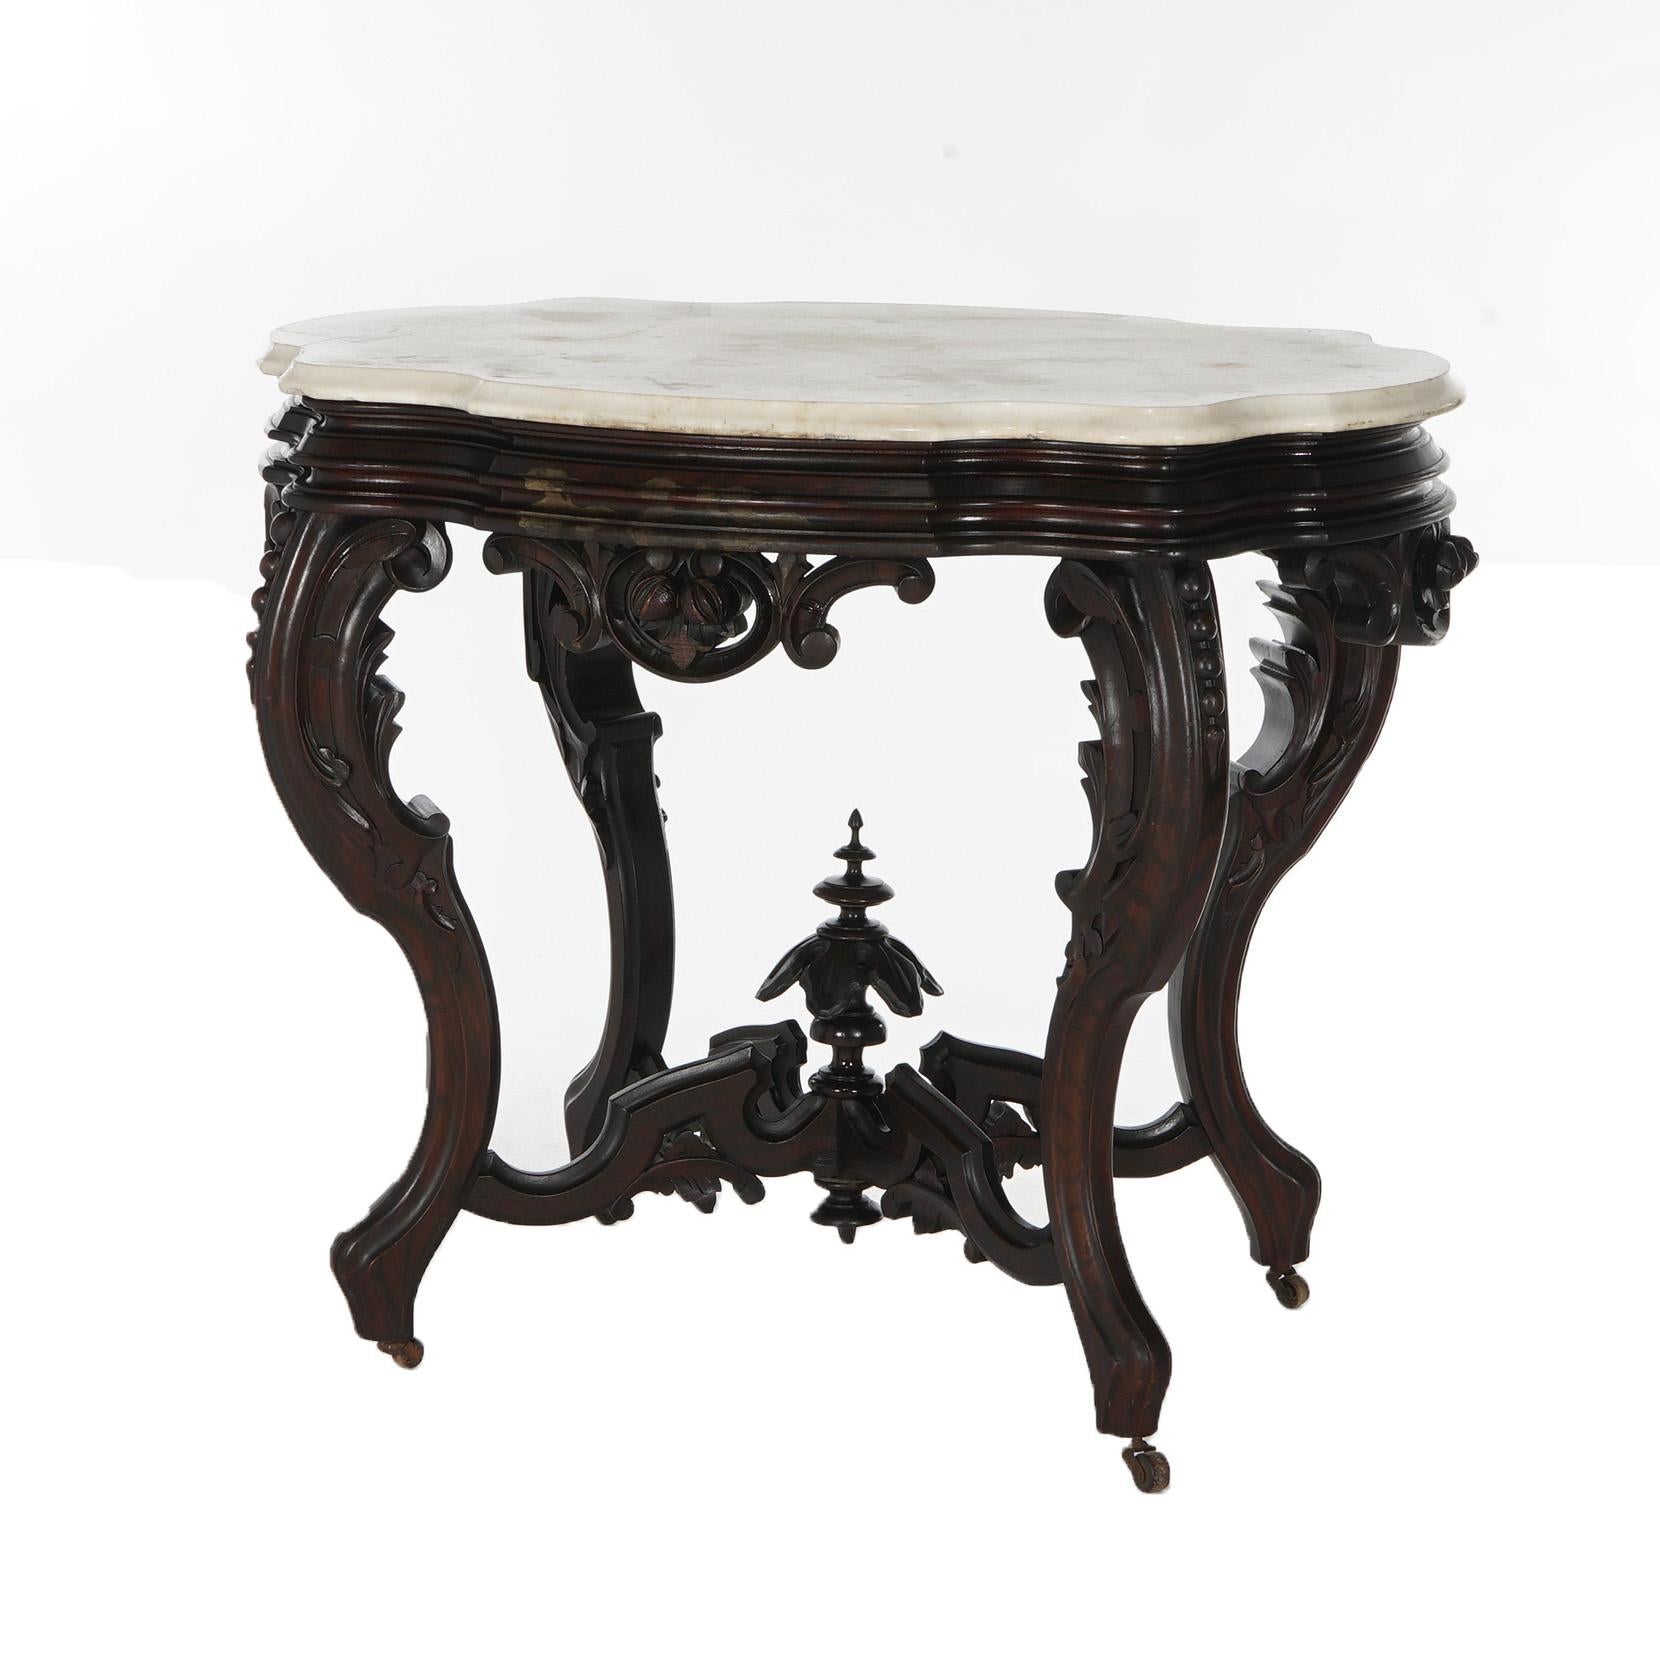 ***Ask About Reduced In-House Delivery Rates - Reliable Professional Service & Fully Insured***

An antique Brooks parlor table offers shaped and beveled marble turtle top over heavily carved walnut base having foliate, floral and scroll elements